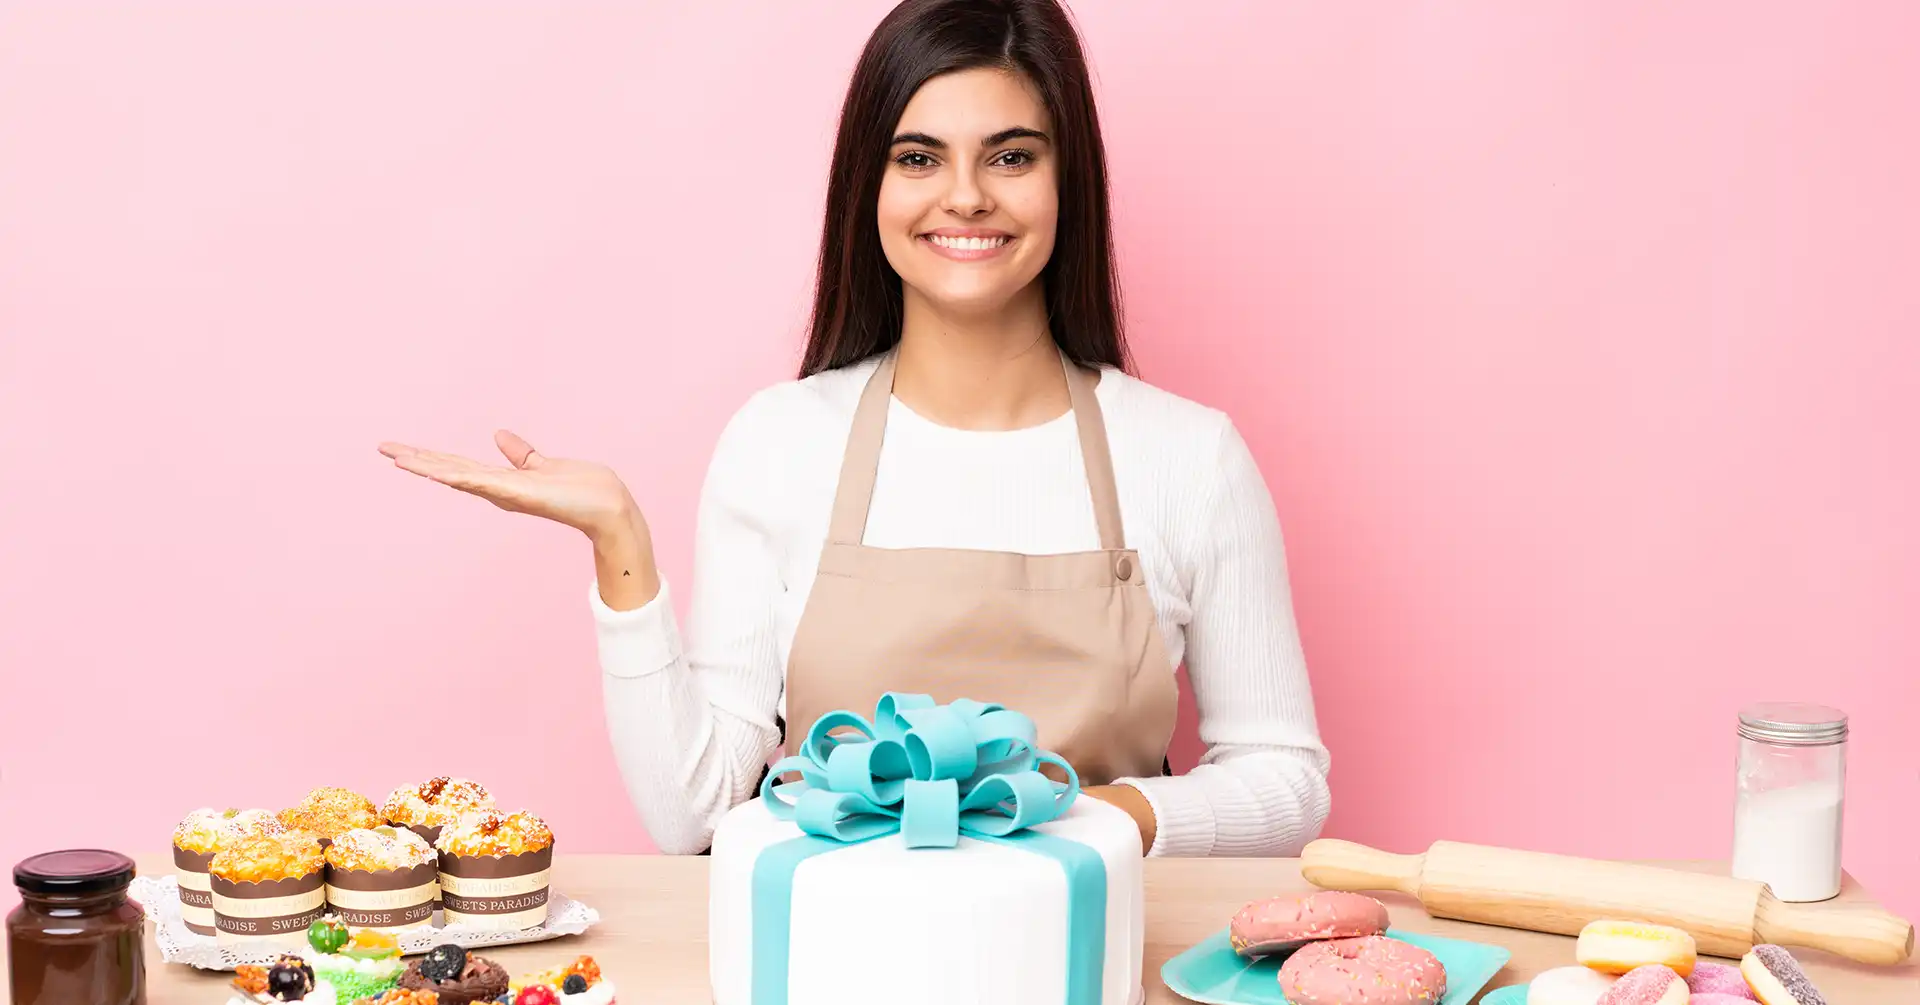 Cake Gifting in the US